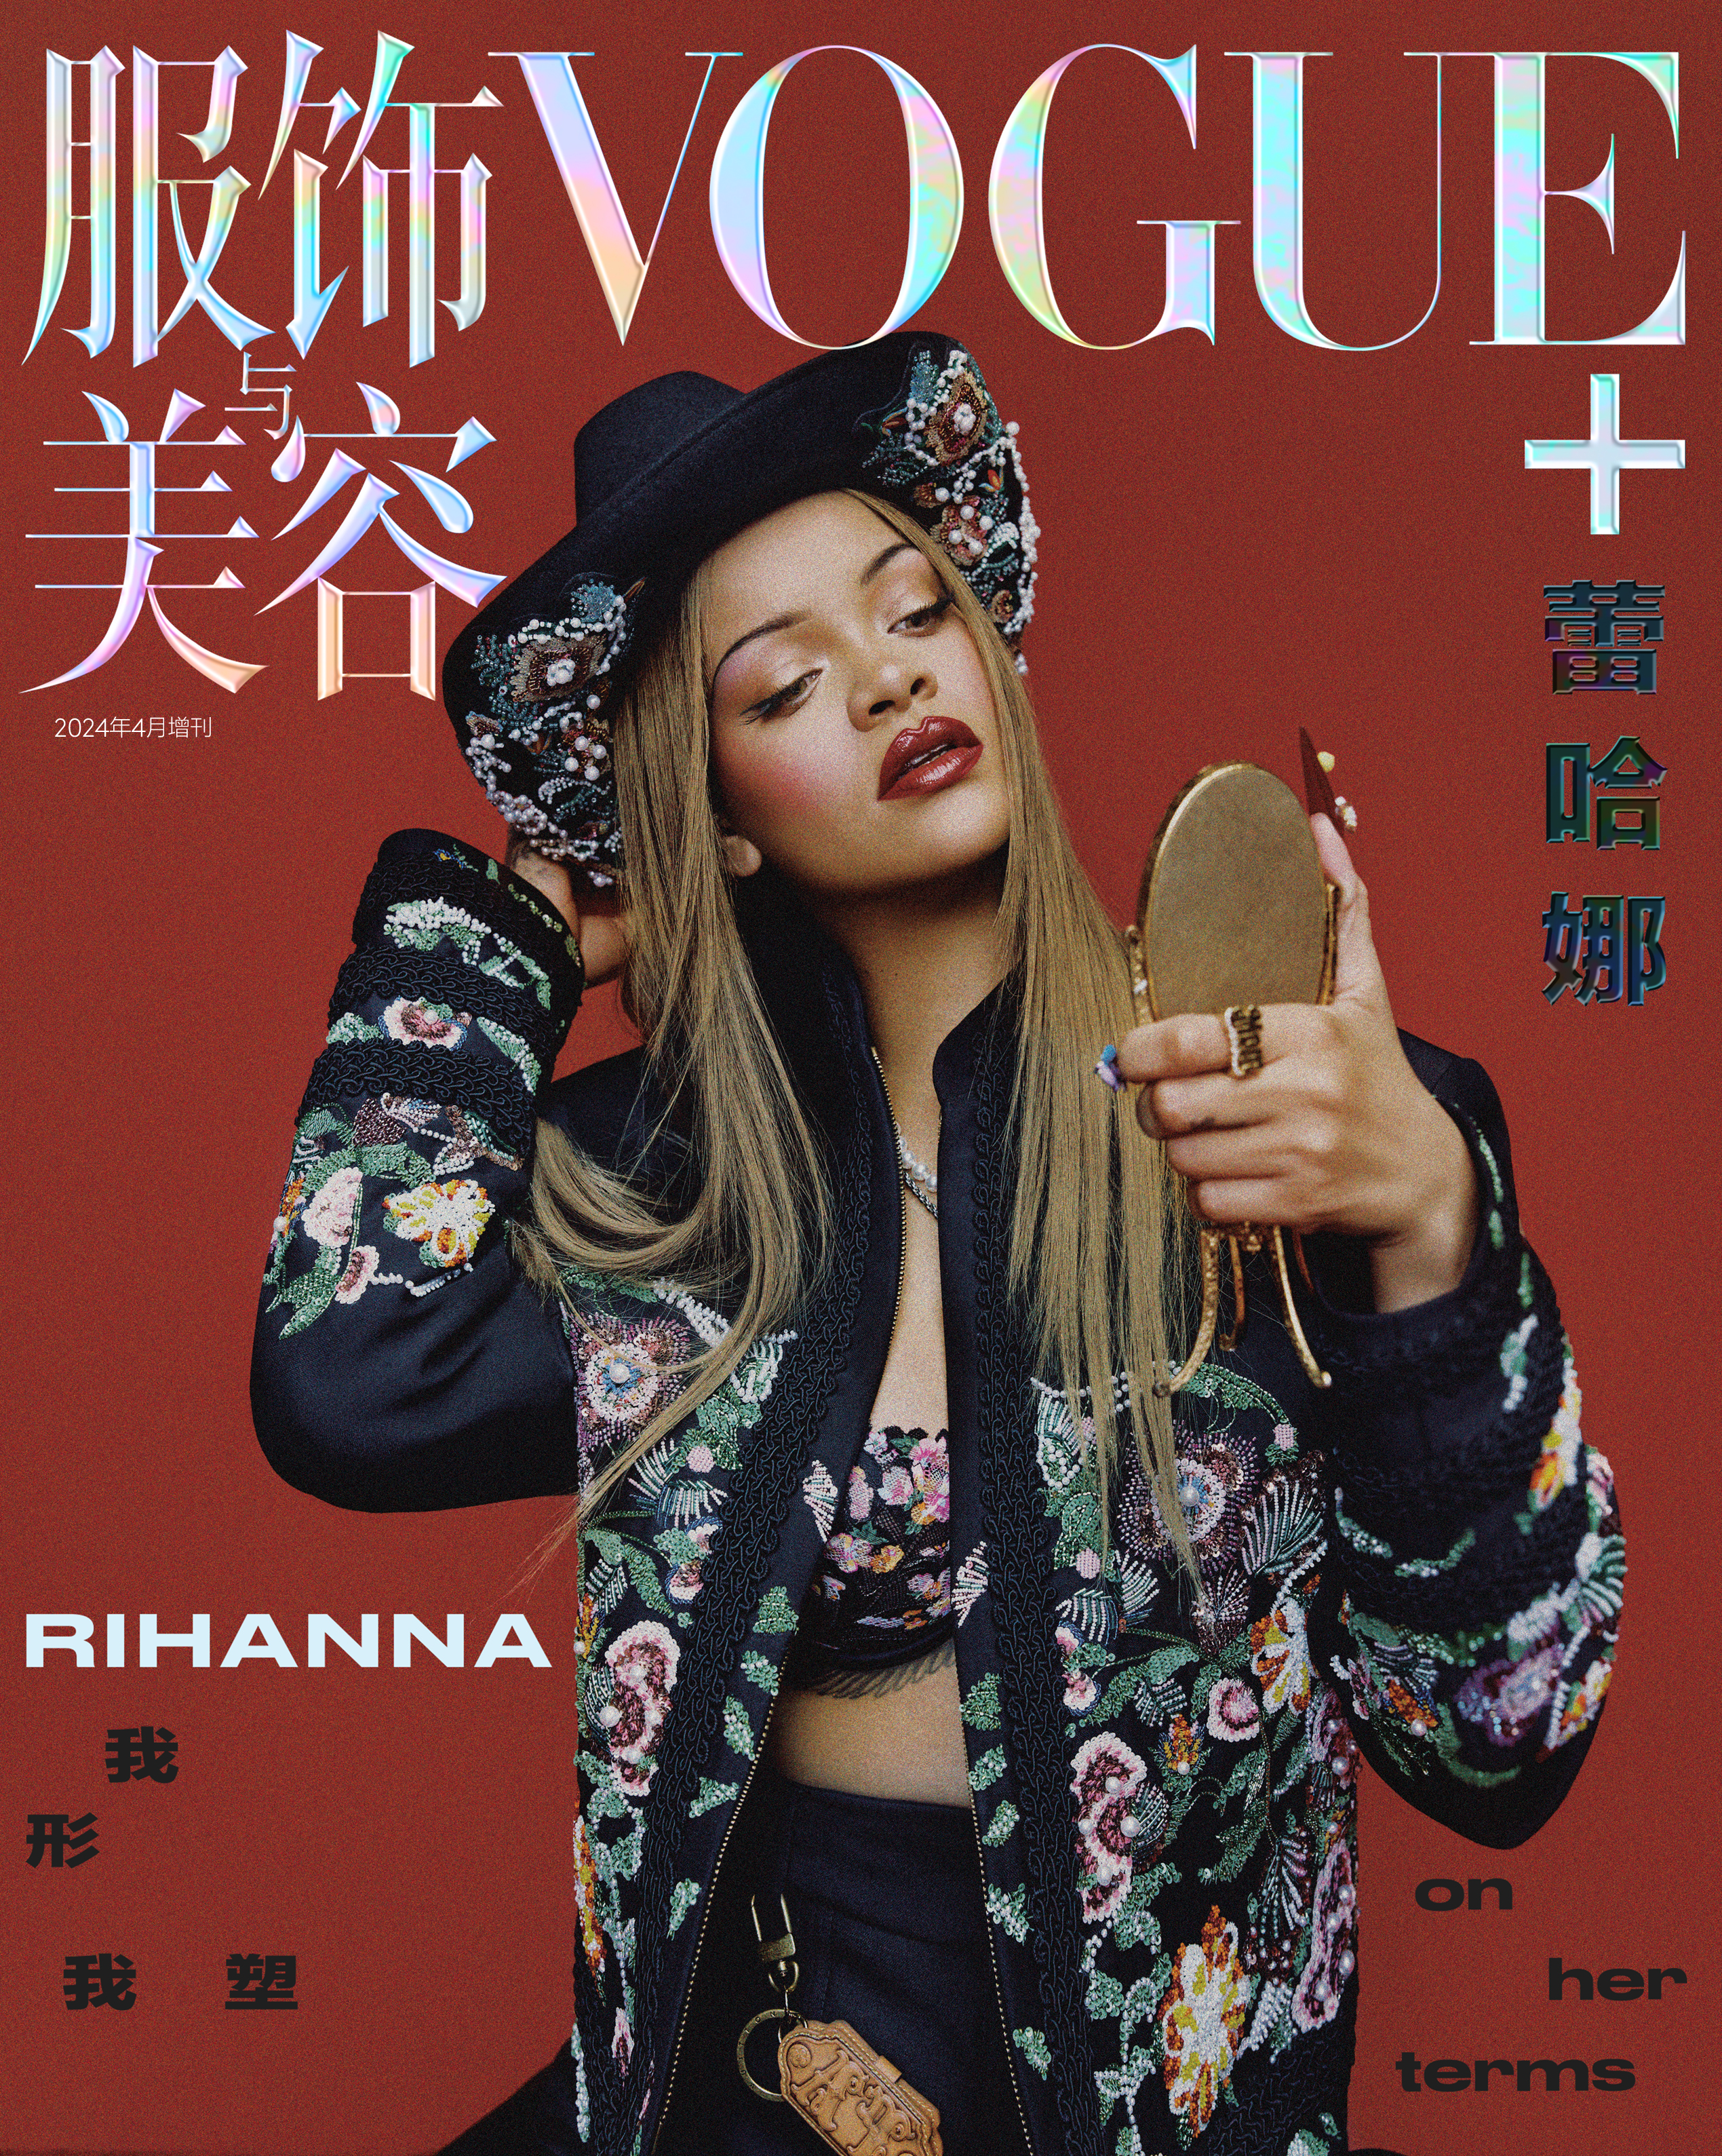 She wore a stetson as she posed for the cover of Vogue China